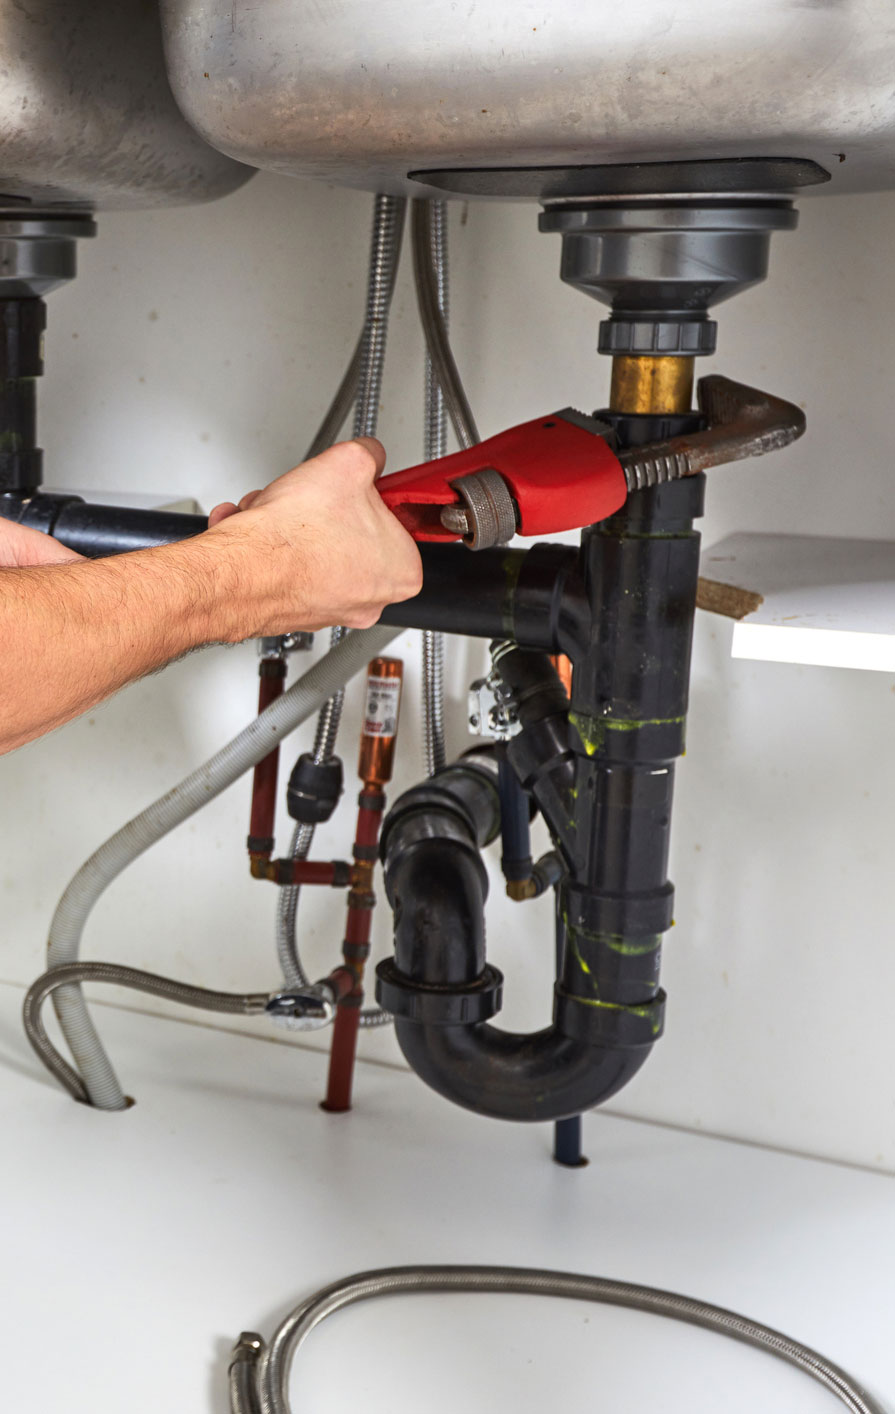 A plumber fixes pipes under a kitchen sink using pump pliers